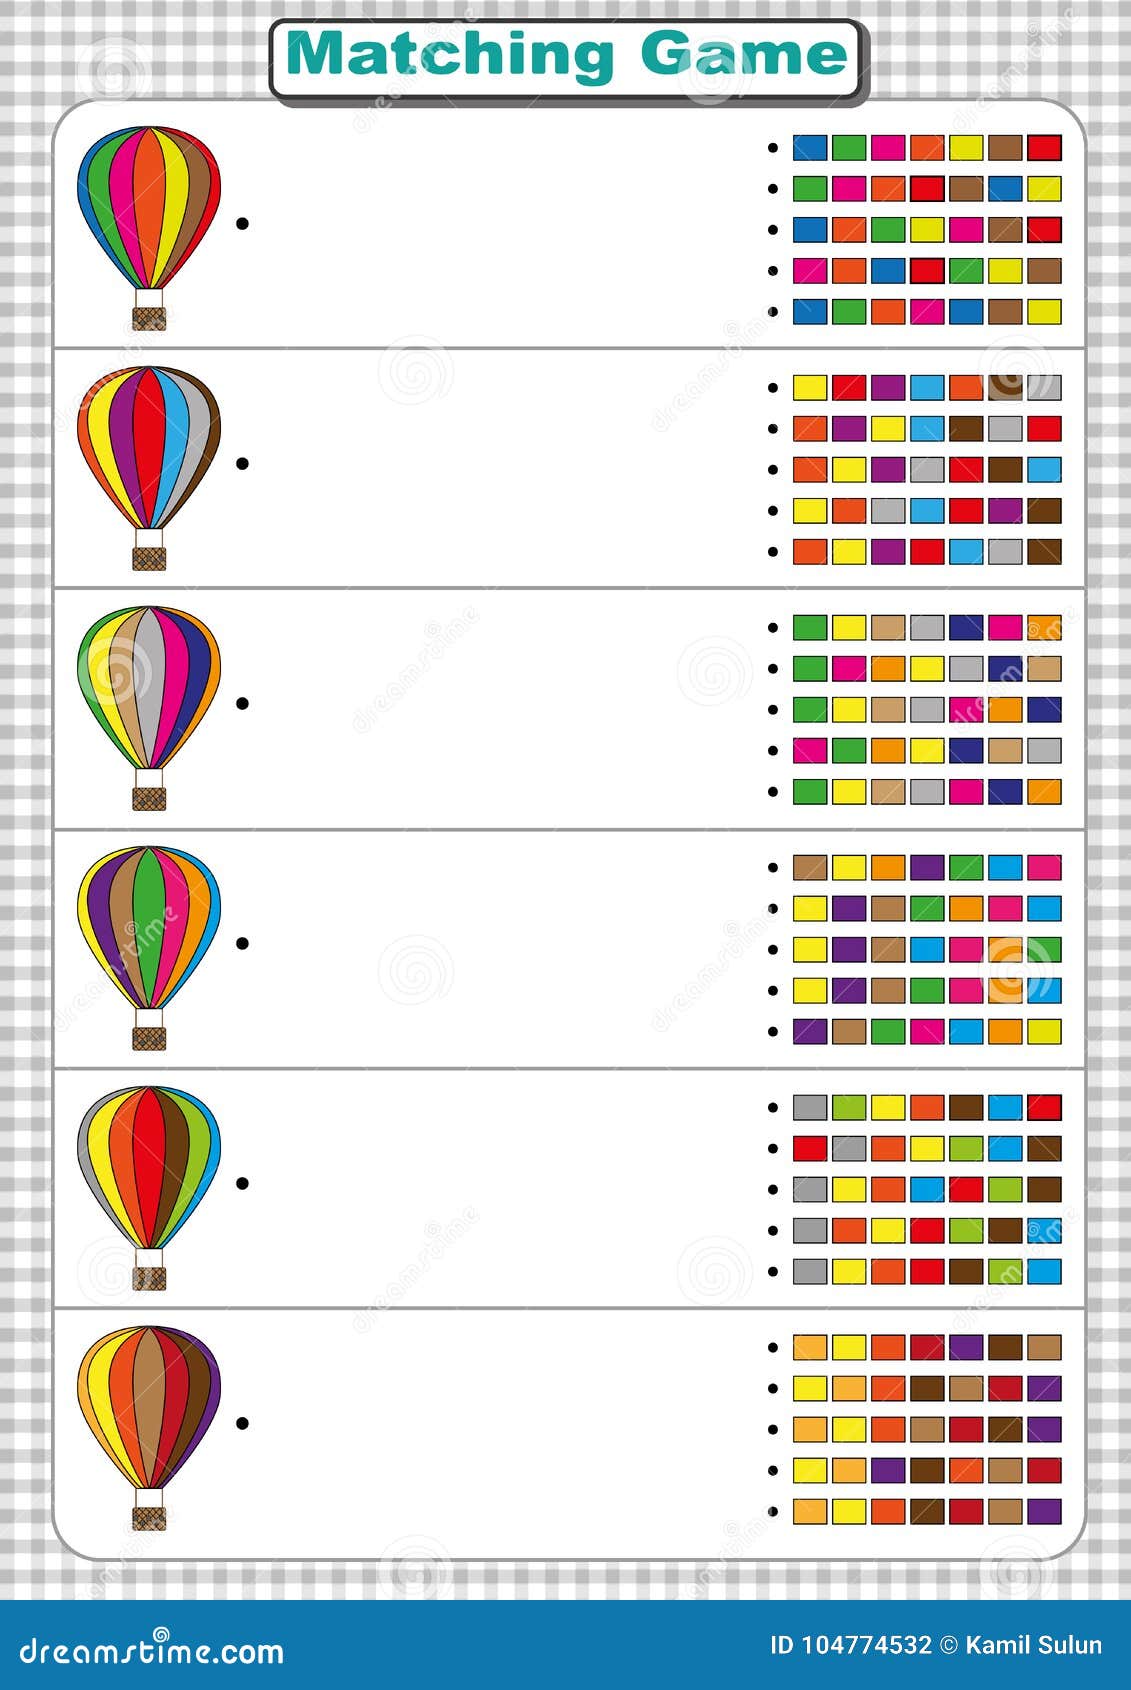 find the color sequence of the air balloon. visual perception worksheet for kids